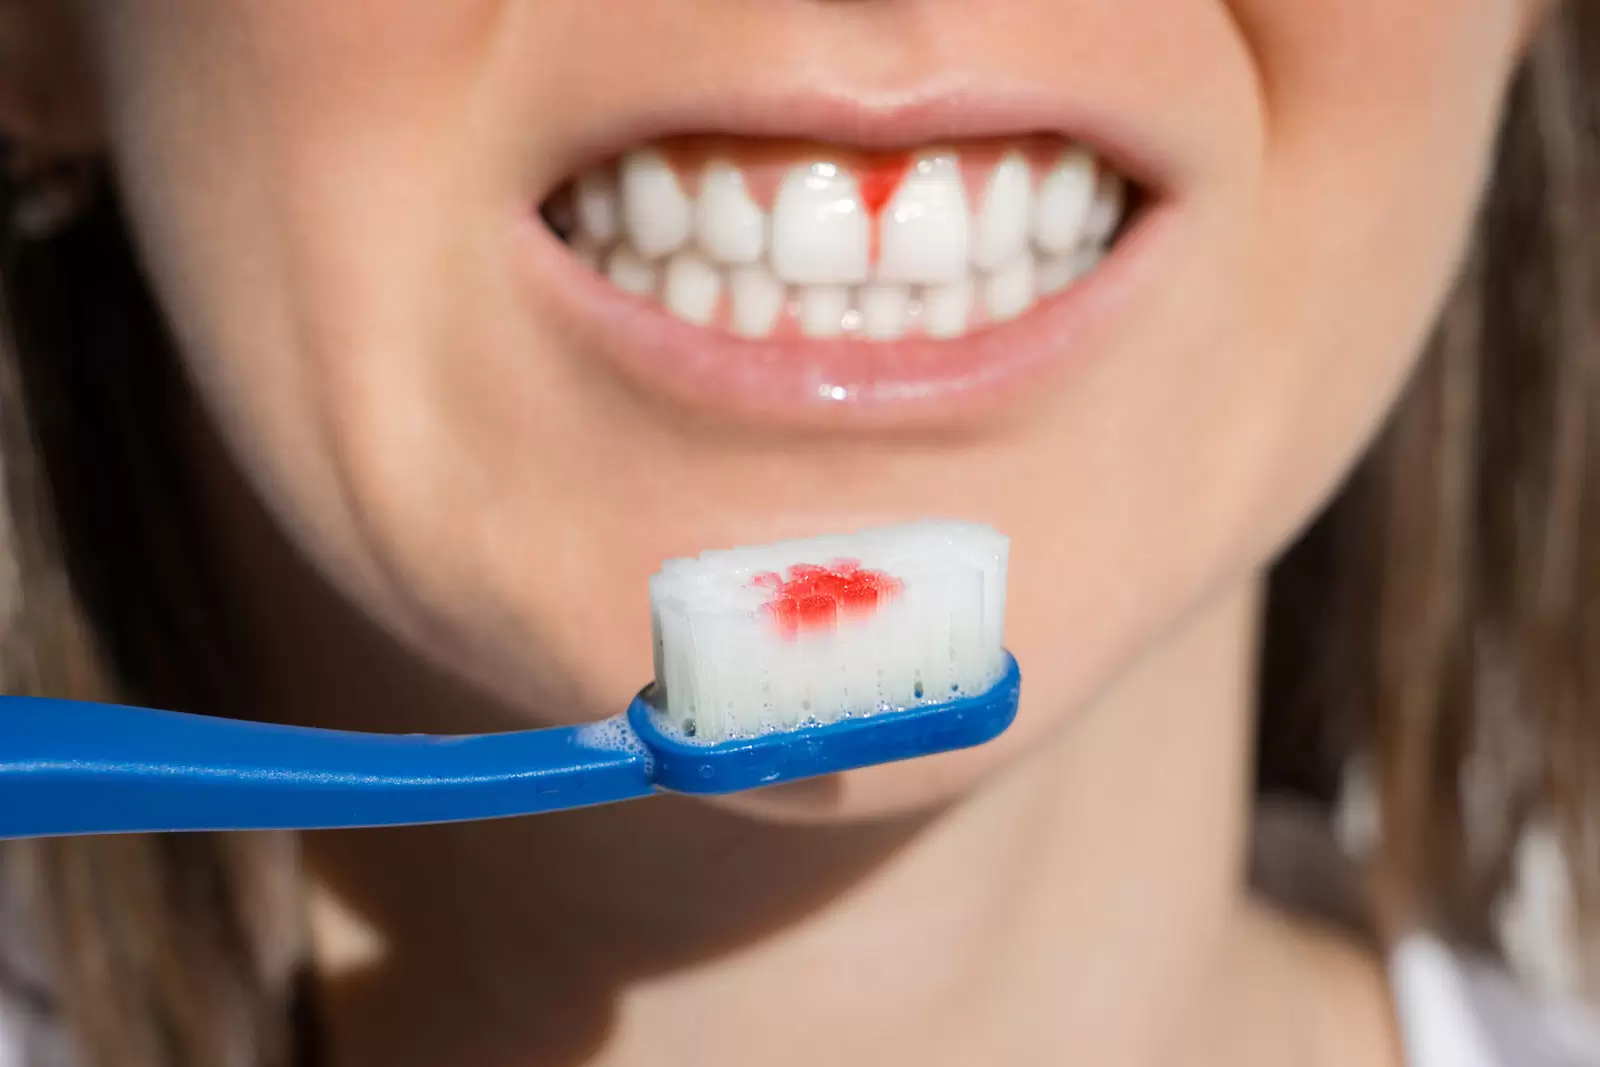 Bleeding Gums When Flossing: Should You Call Your Dentist?